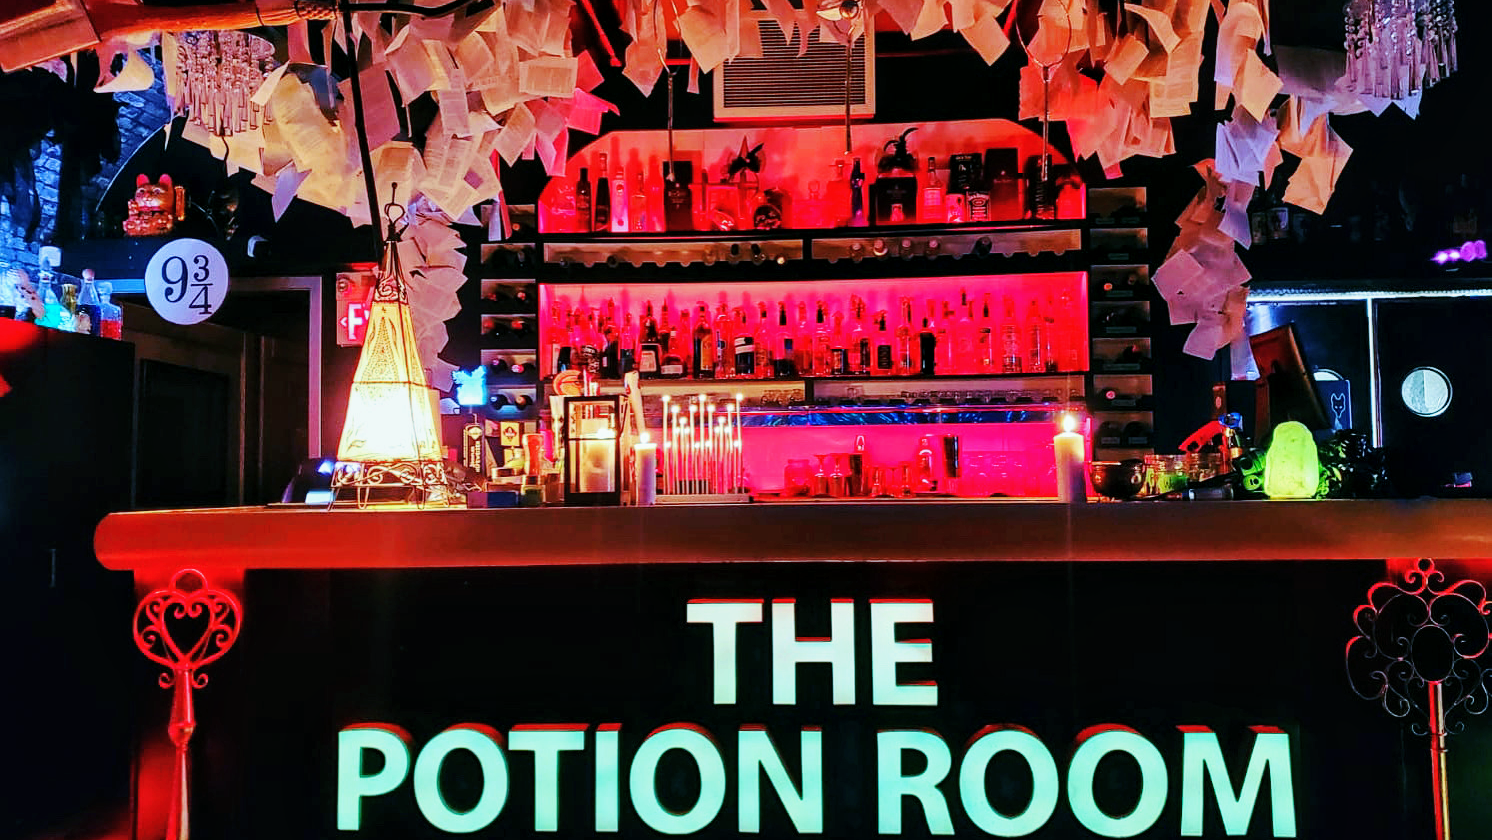 THE POTION ROOM